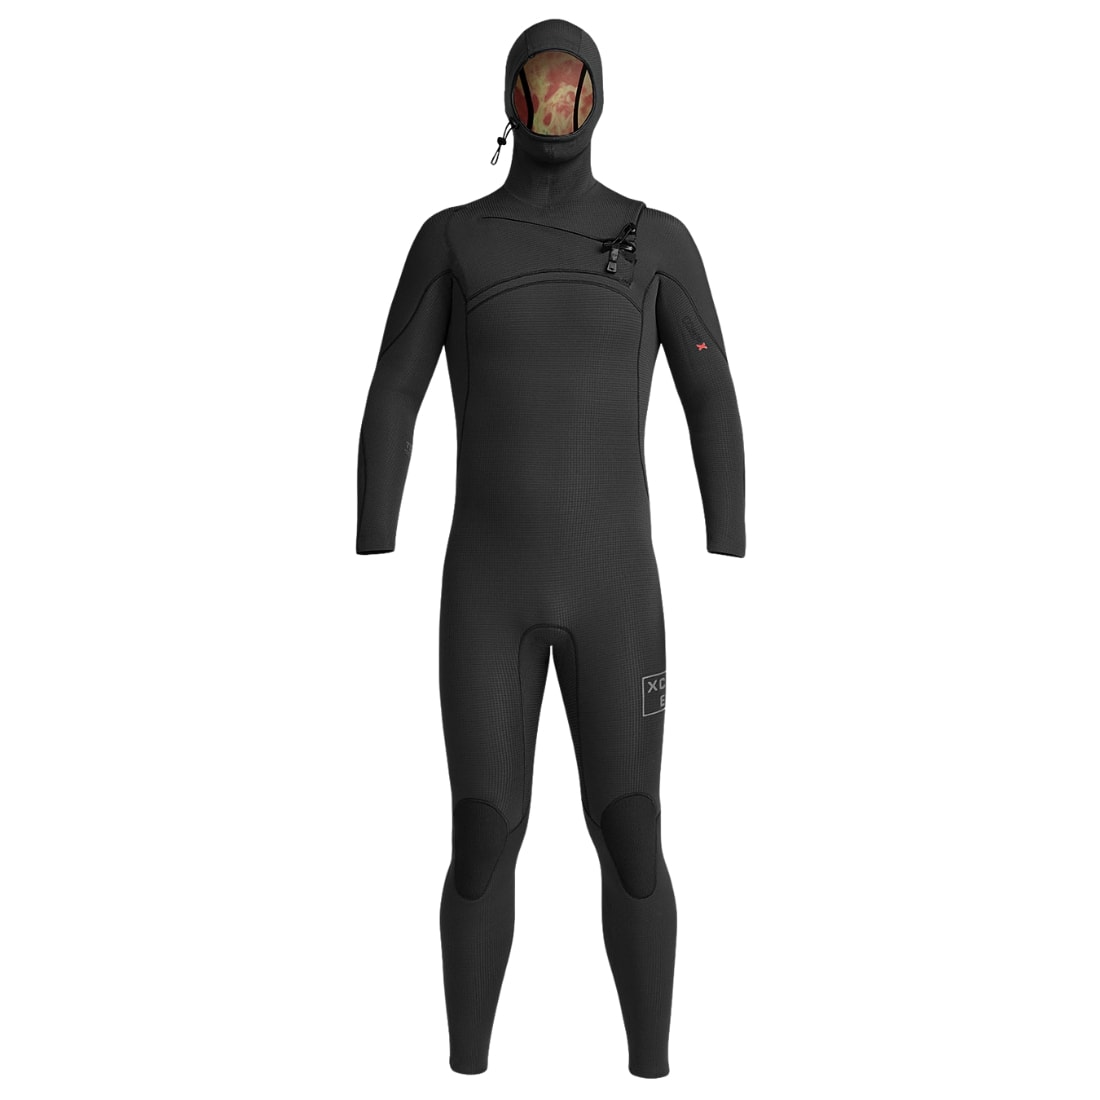 Xcel Mens Comp X 4.5/3.5mm Hooded Wetsuit 2022/23 - Black - Mens Full Length Wetsuit by Xcel